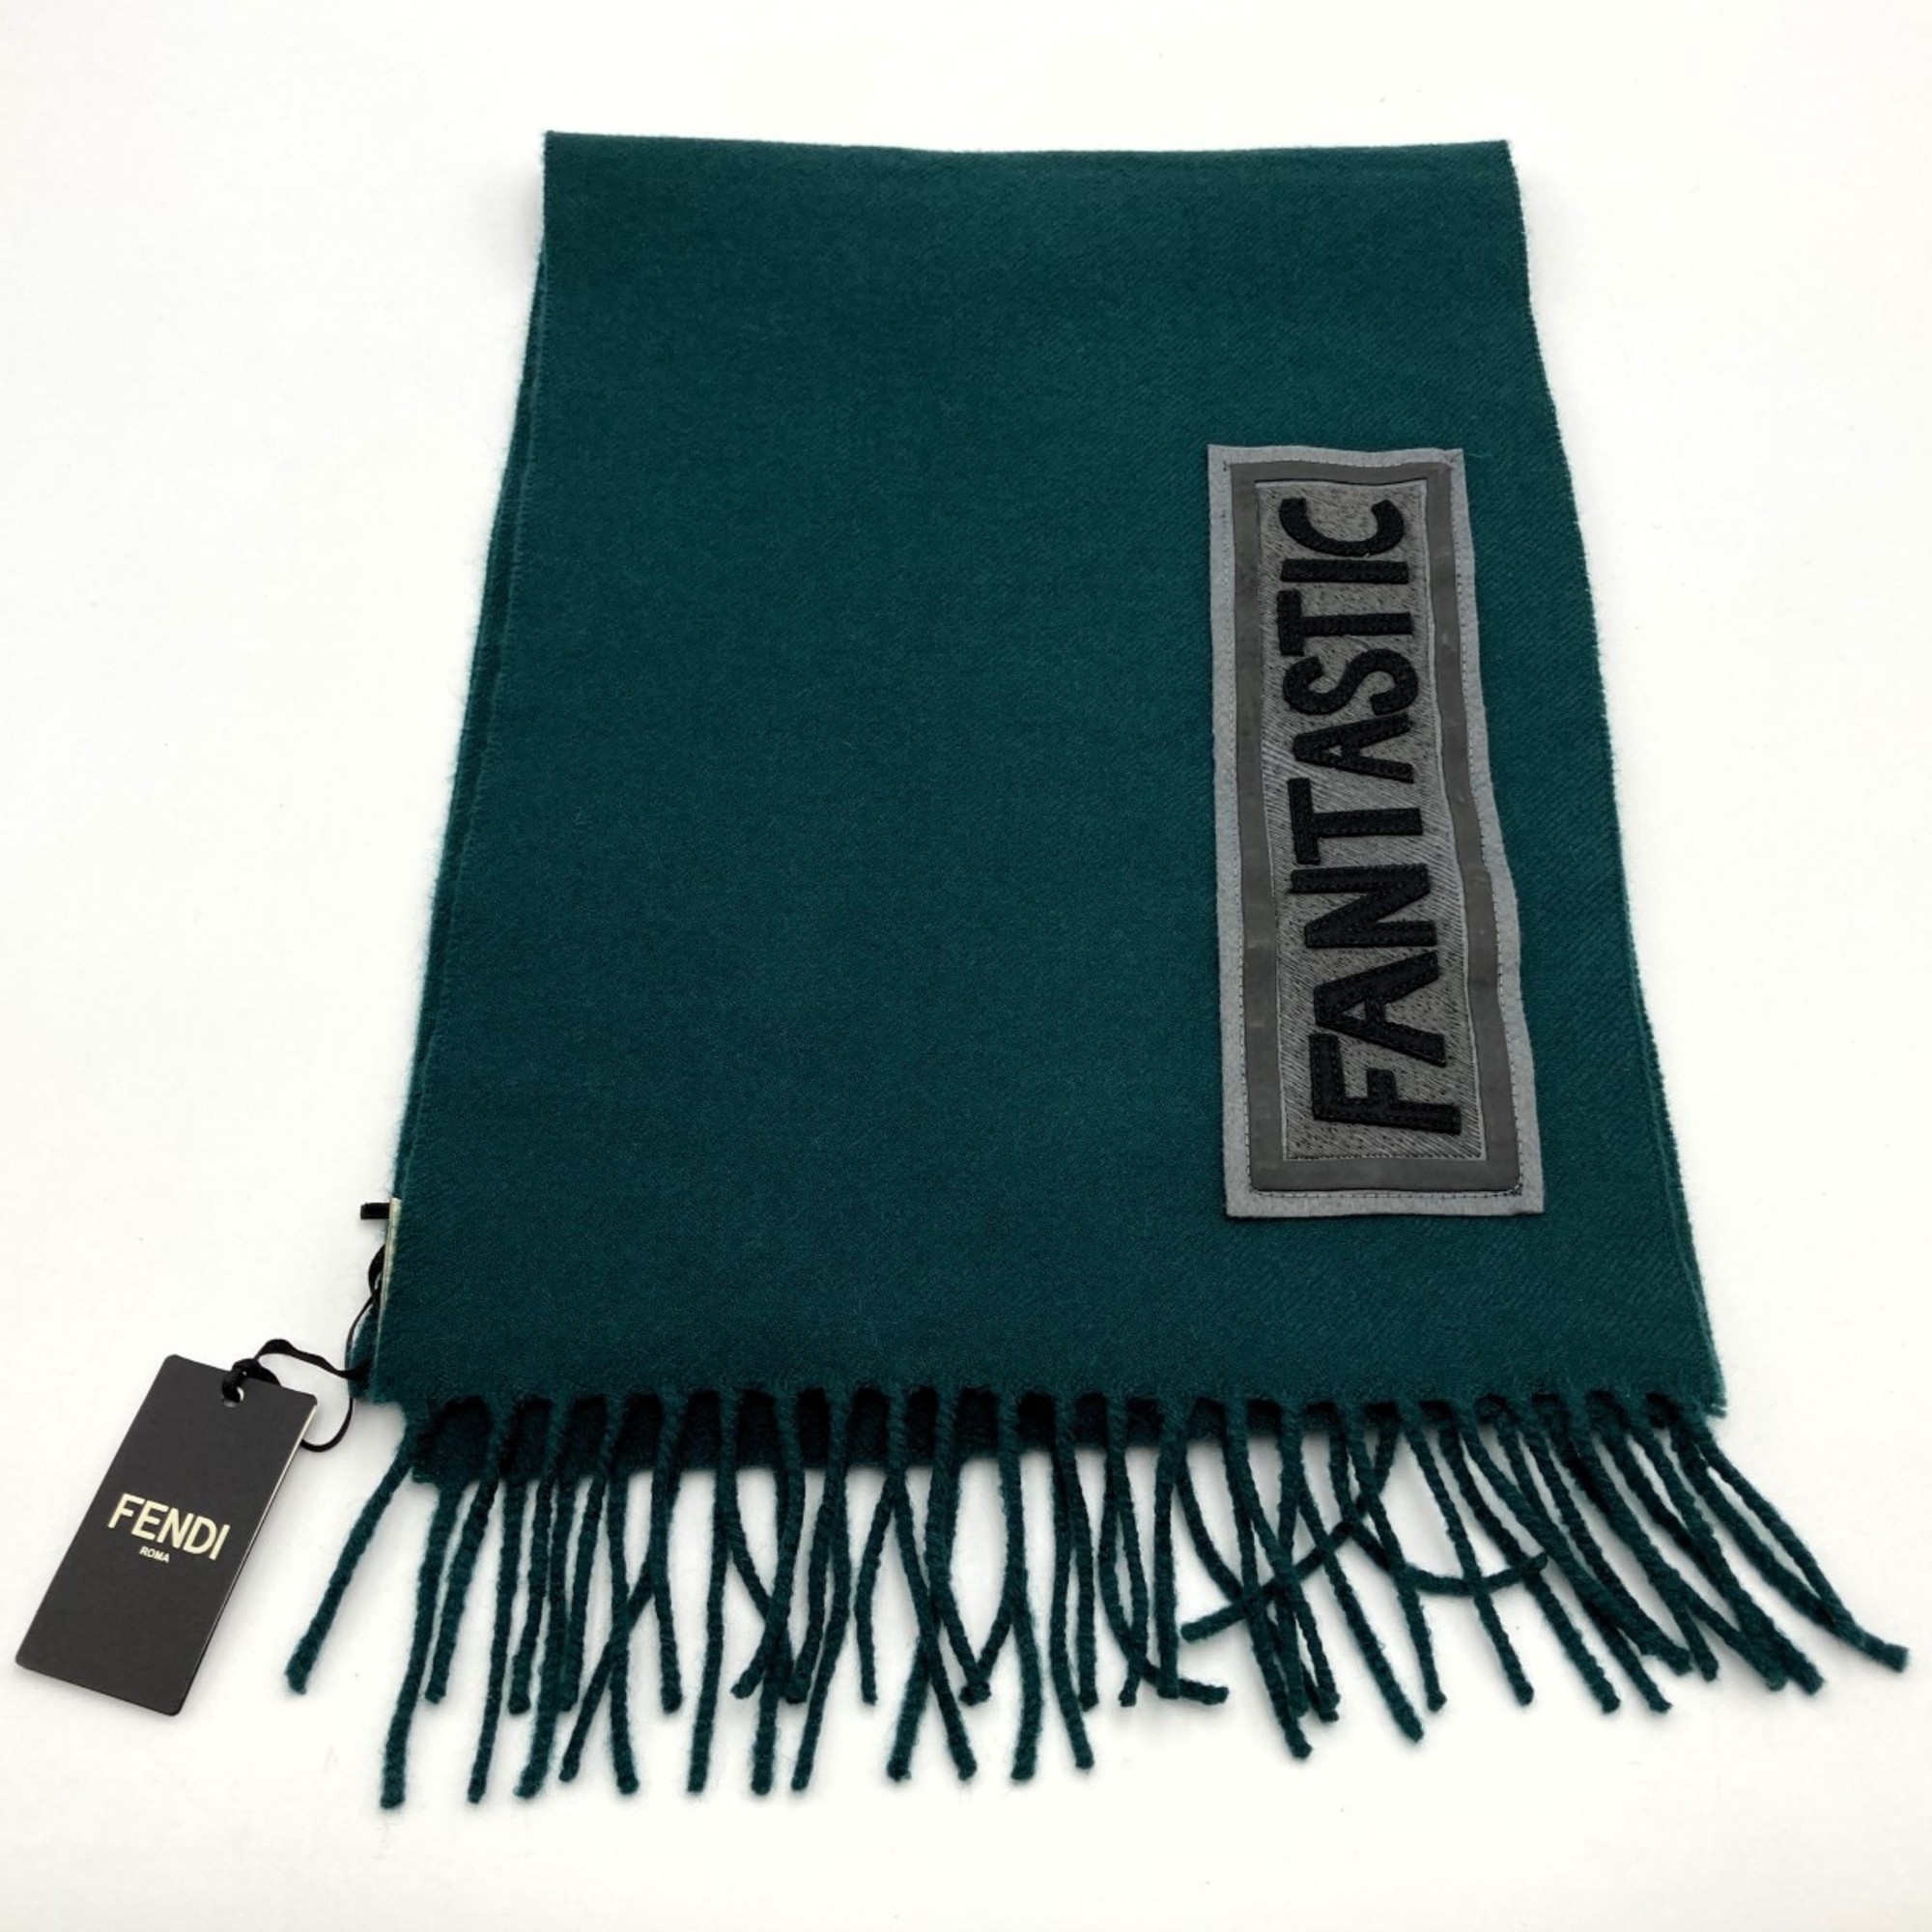 FENDI Muffler Stole Logo Green Women's Men's Fashion Cold Protection Accessories with Tag USED